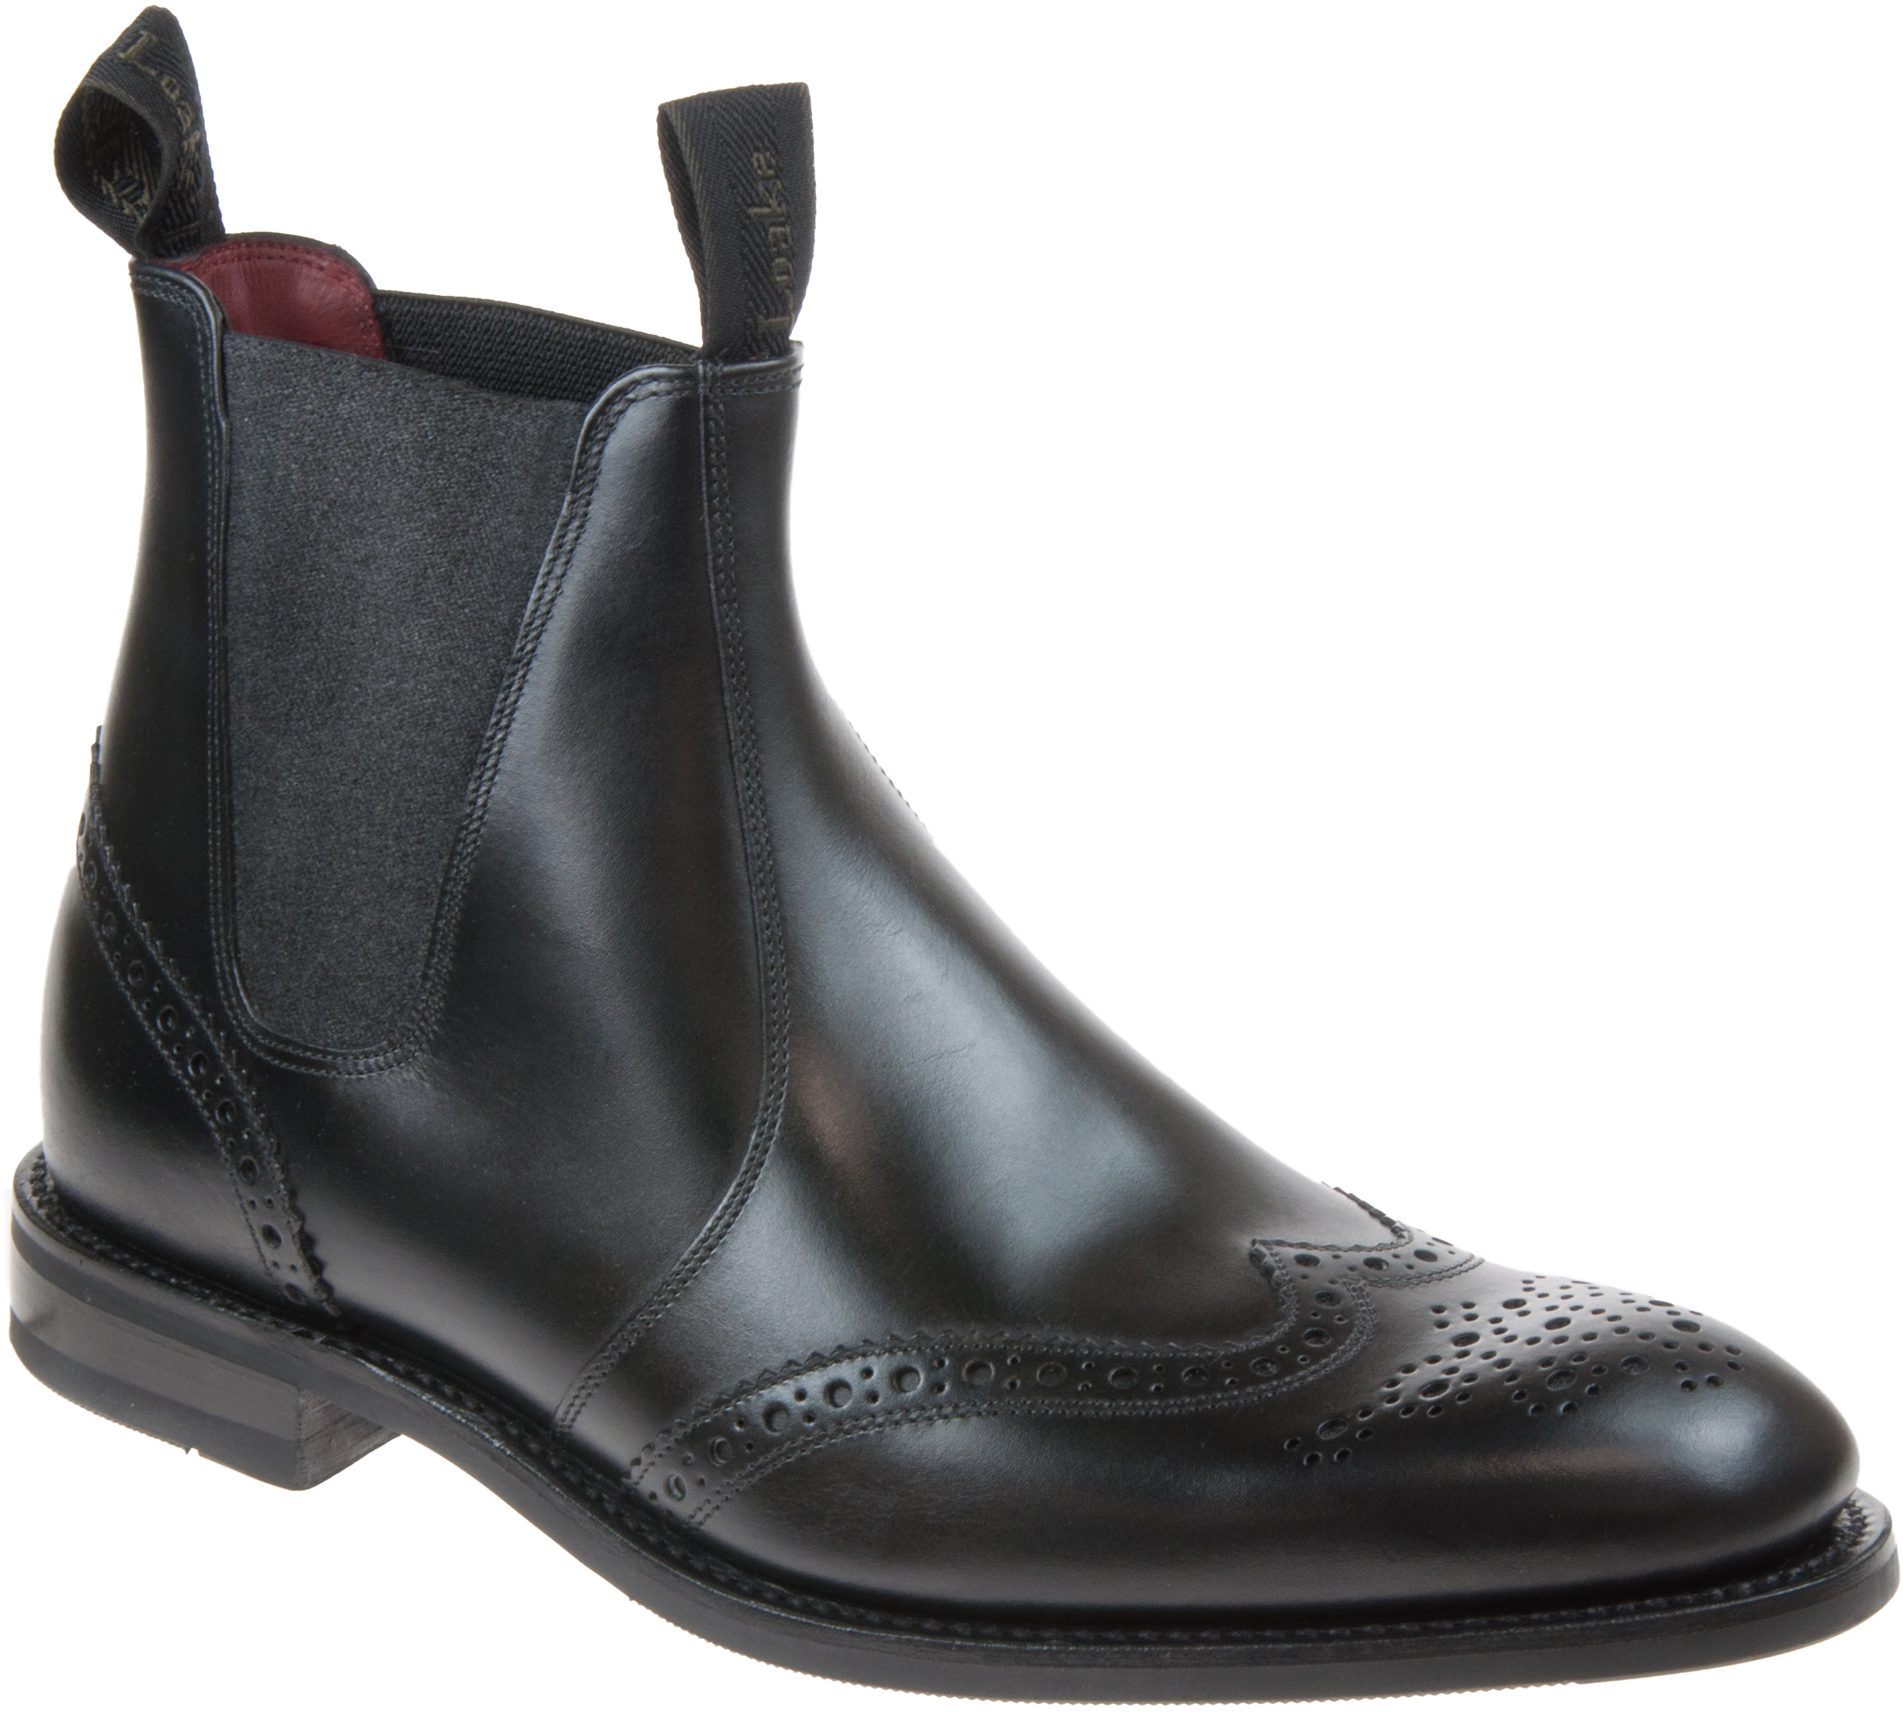 Loake Hoskins Black - Formal Boots - Humphries Shoes